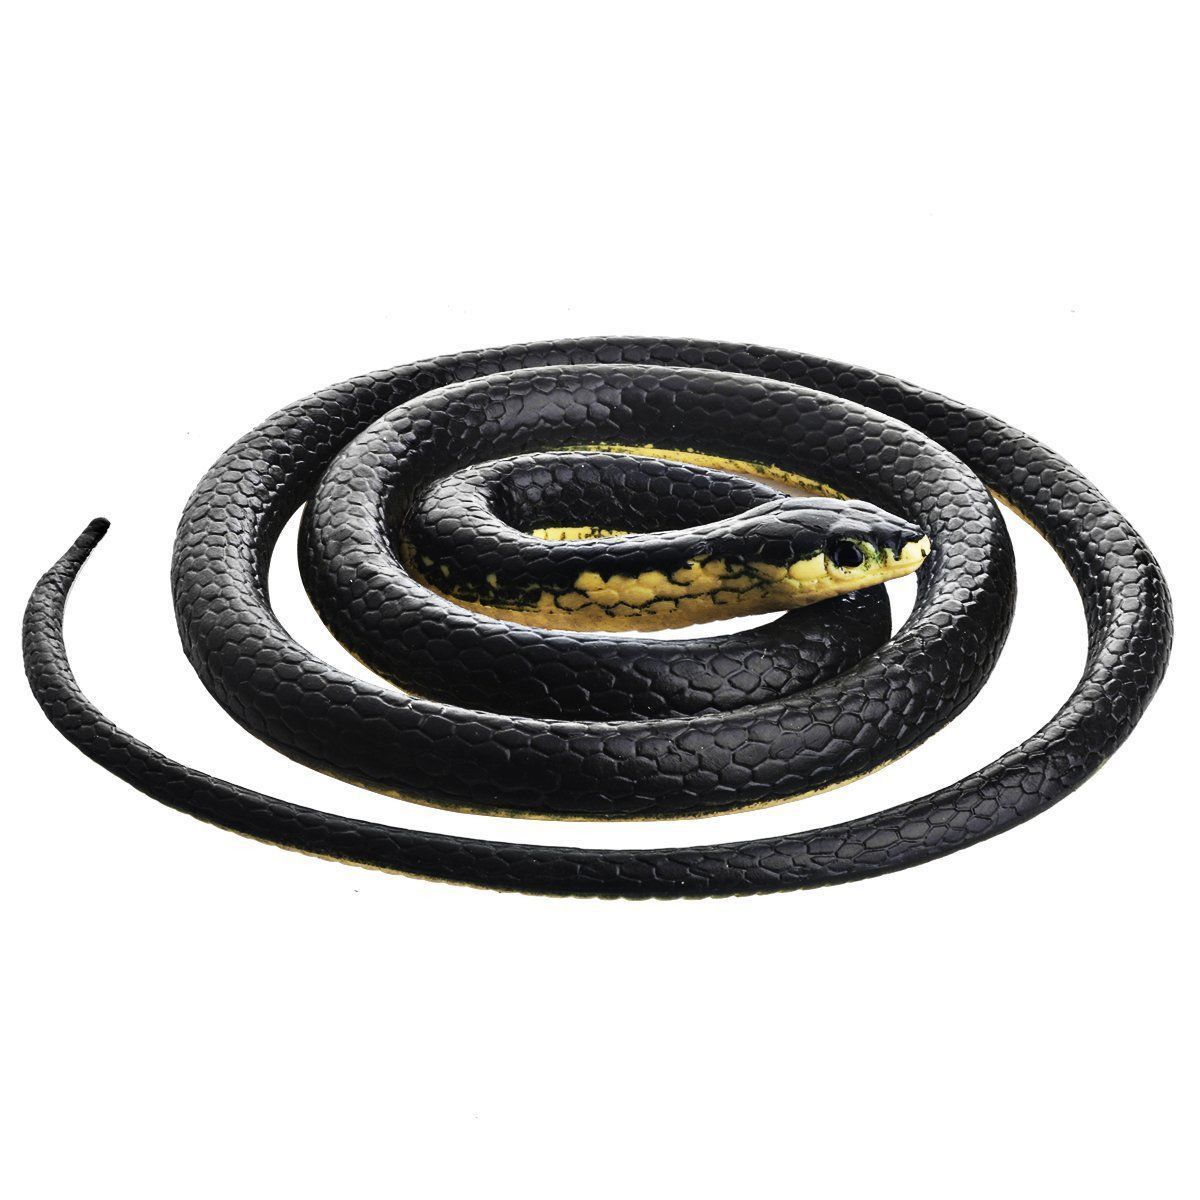 130cm-Realistic-Snake-Rattlesnake-Trick-Terrifying-Mischief-Rubber-Scary-Decorations-1554281